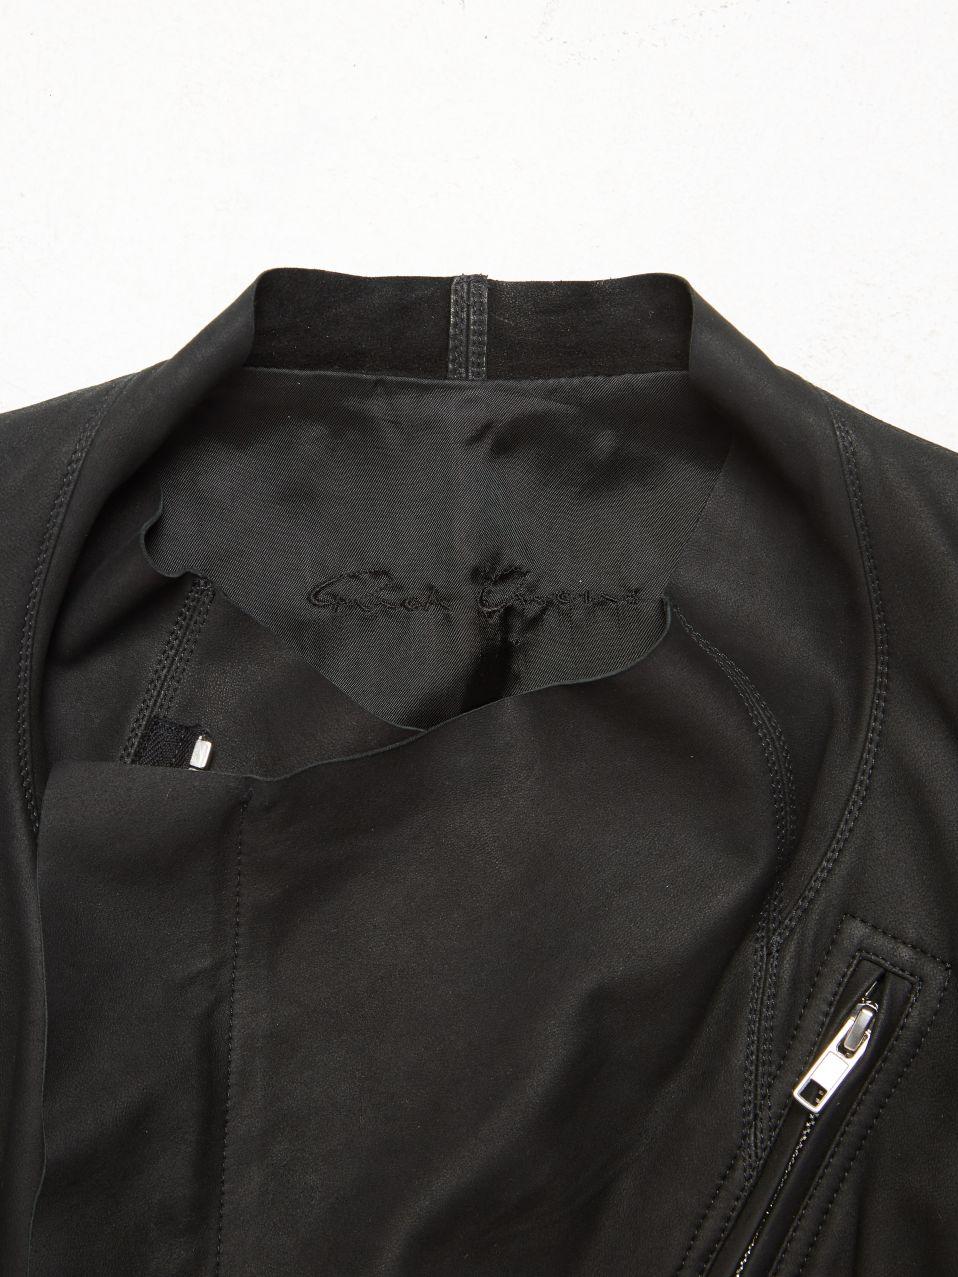 Rick Owens  Black Asymmetrical Zipped Leather Jacket In New Condition For Sale In Dover, DE